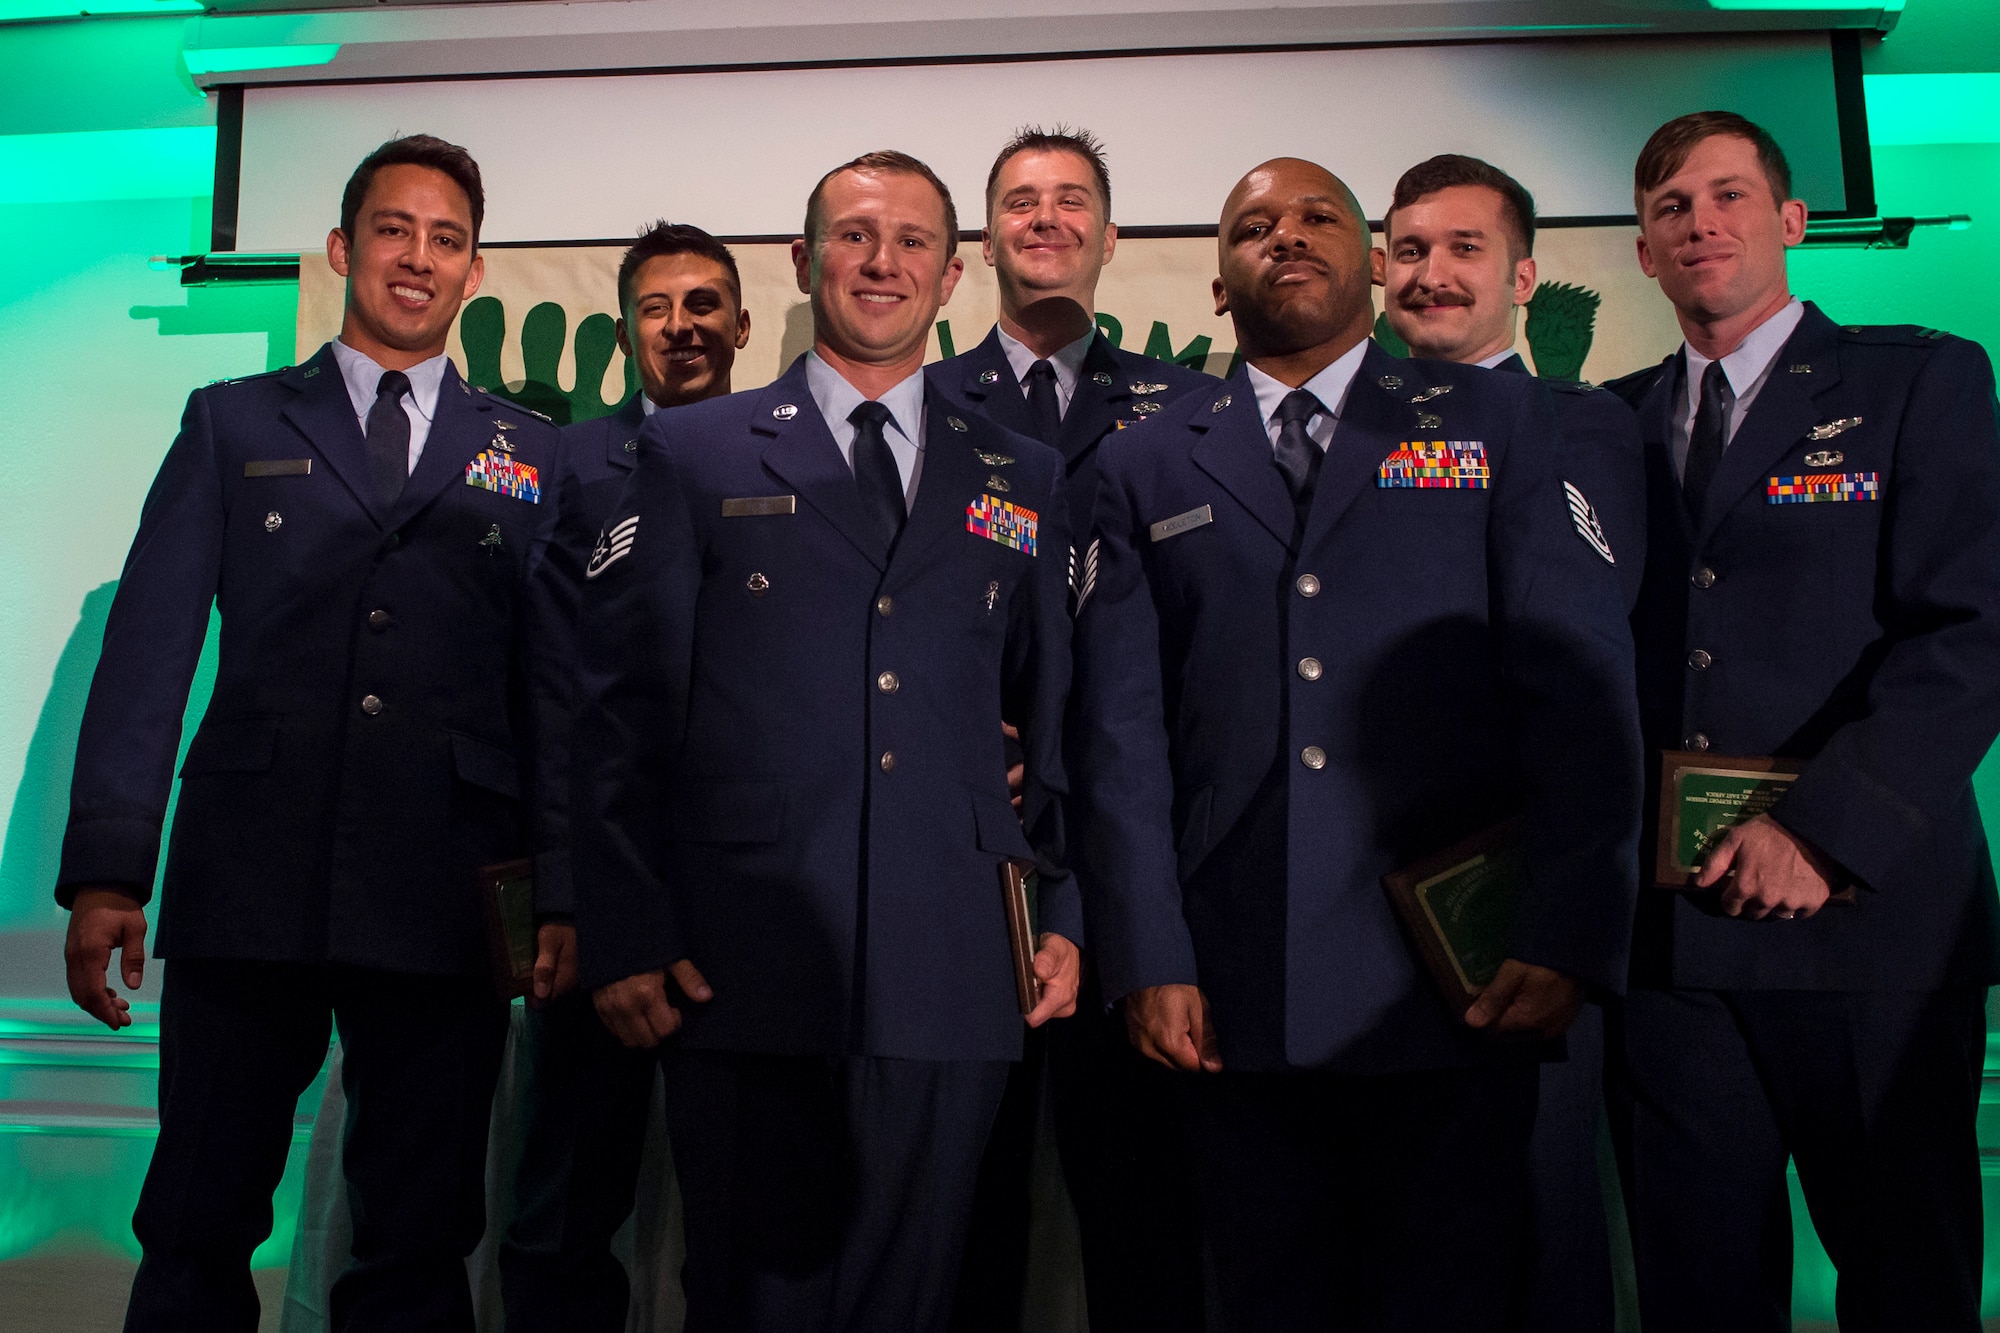 Pararescuemen from the 48th Rescue Squadron (RQS) and aircrew from the 41st RQS, pose for a photo during the banquet celebrating the 50th reunion of the Jolly Green Association (JGA), May 4, 2019, in Fort Walton Beach, Fla. The JGA presented Airmen from the 41st RQS and the 48th RQS with the Rescue Mission of the Year award; the only non Air Force award recognized by the Air Force. (U.S. Air Force Photo by Staff Sgt. Janiqua P. Robinson)